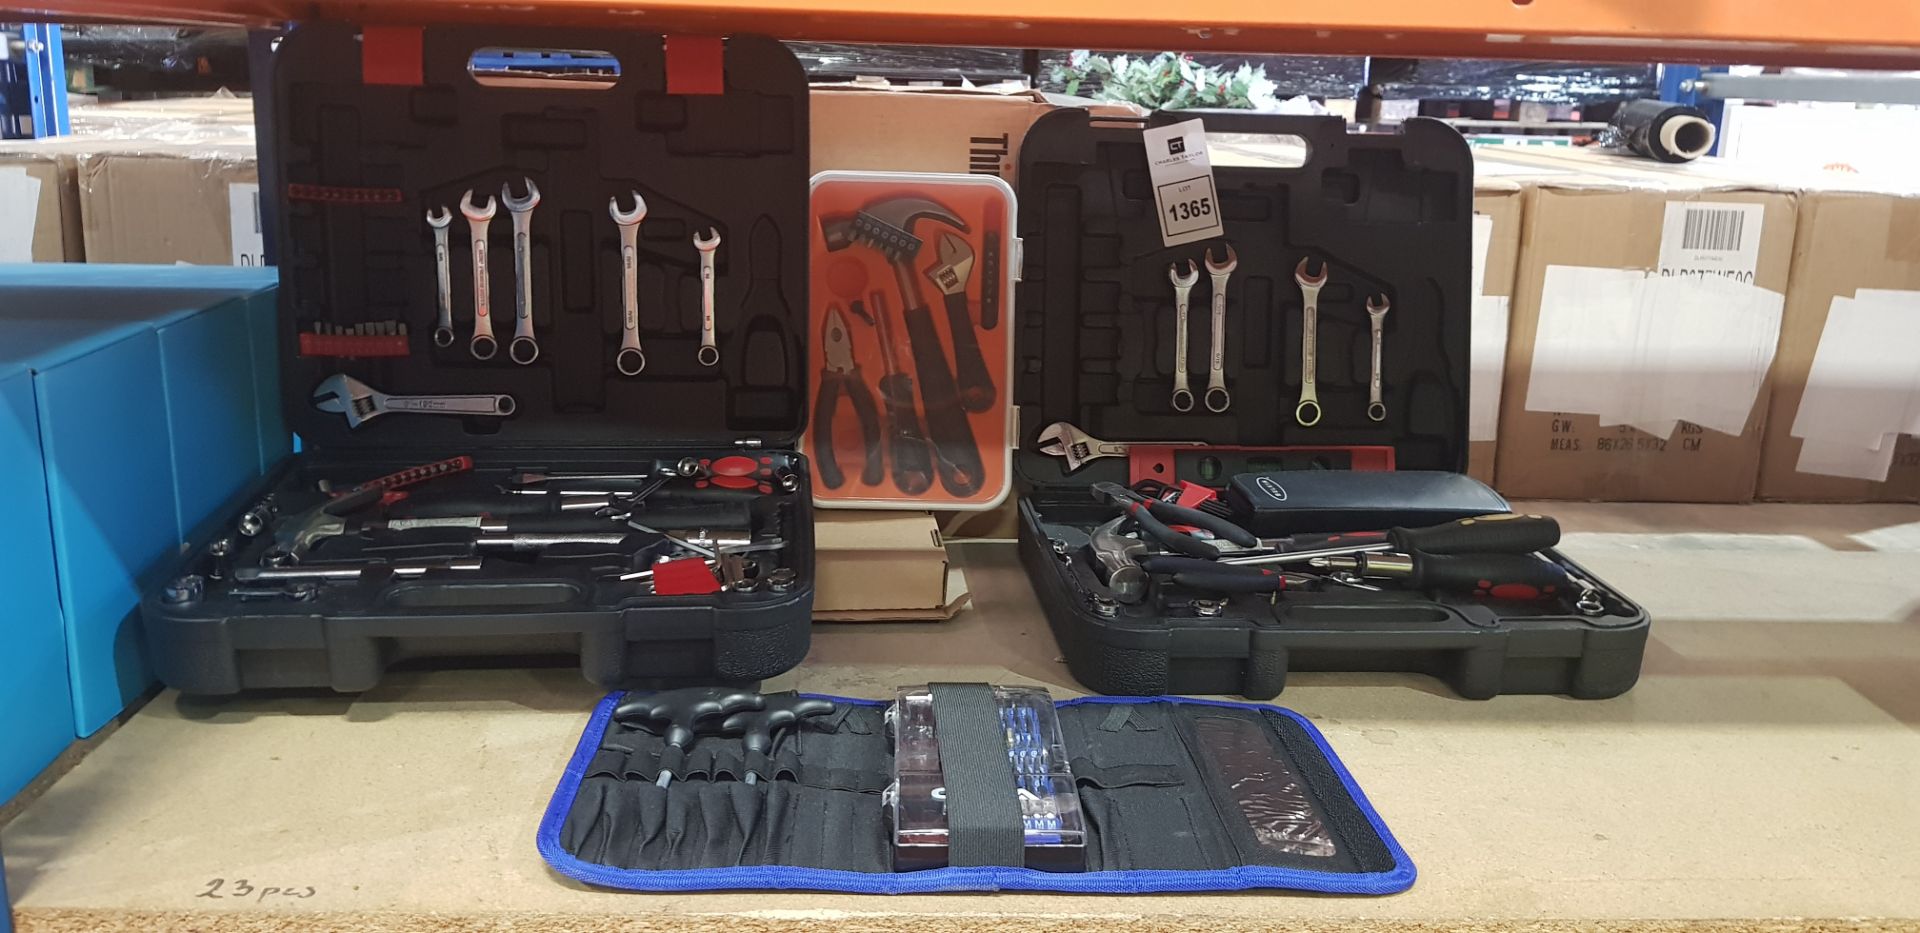 4 X MIXED TOOL SETS TO INCLUDE HAMMERS / SPANNERS / SOCKETS / SCREWDRIVERS / ALLEN KEYS / ETC -